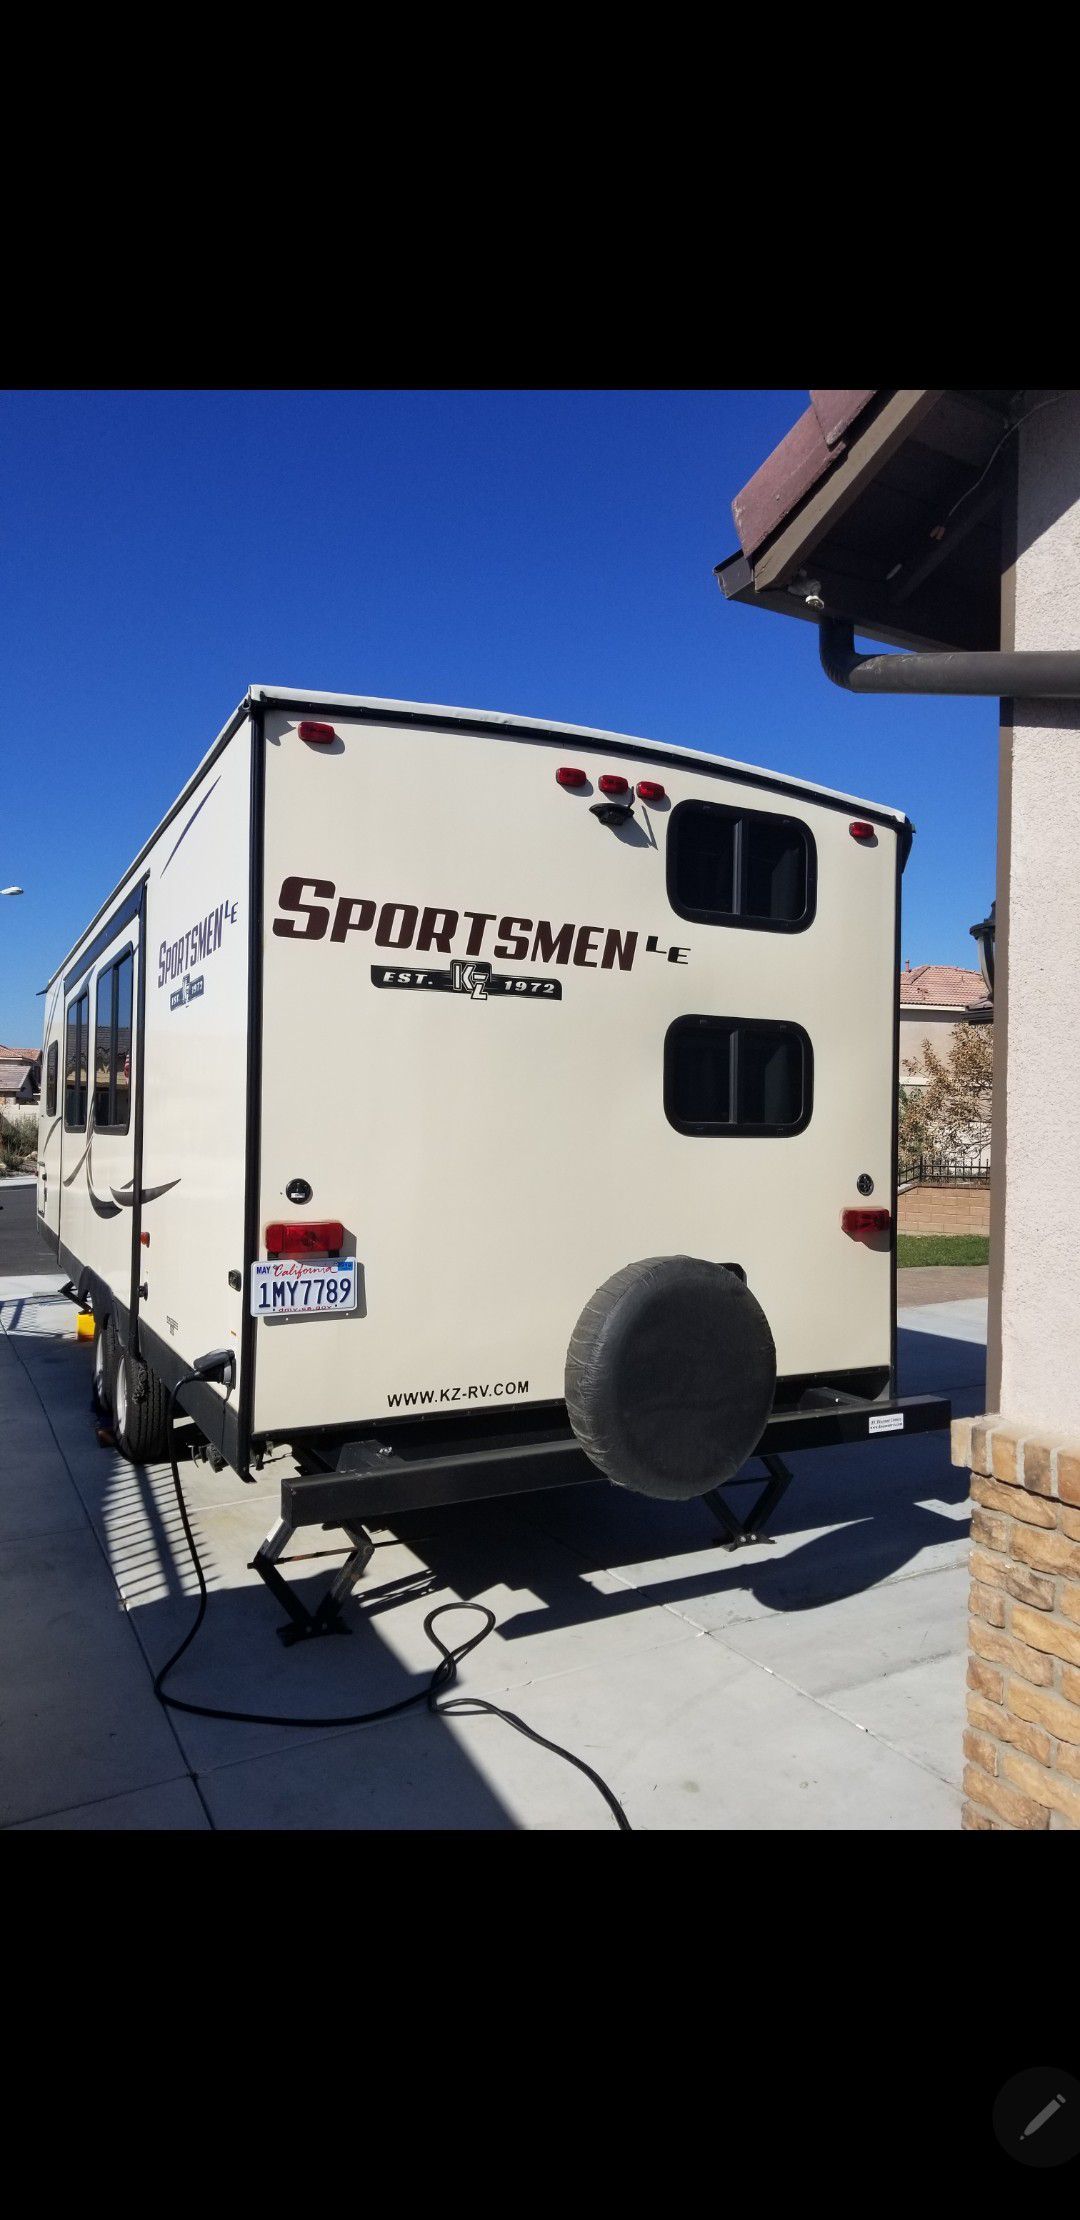 Call Steve @ {contact info removed} - TRAVEL TRAILER 2018 SPORTSMAN 27FT $18,500